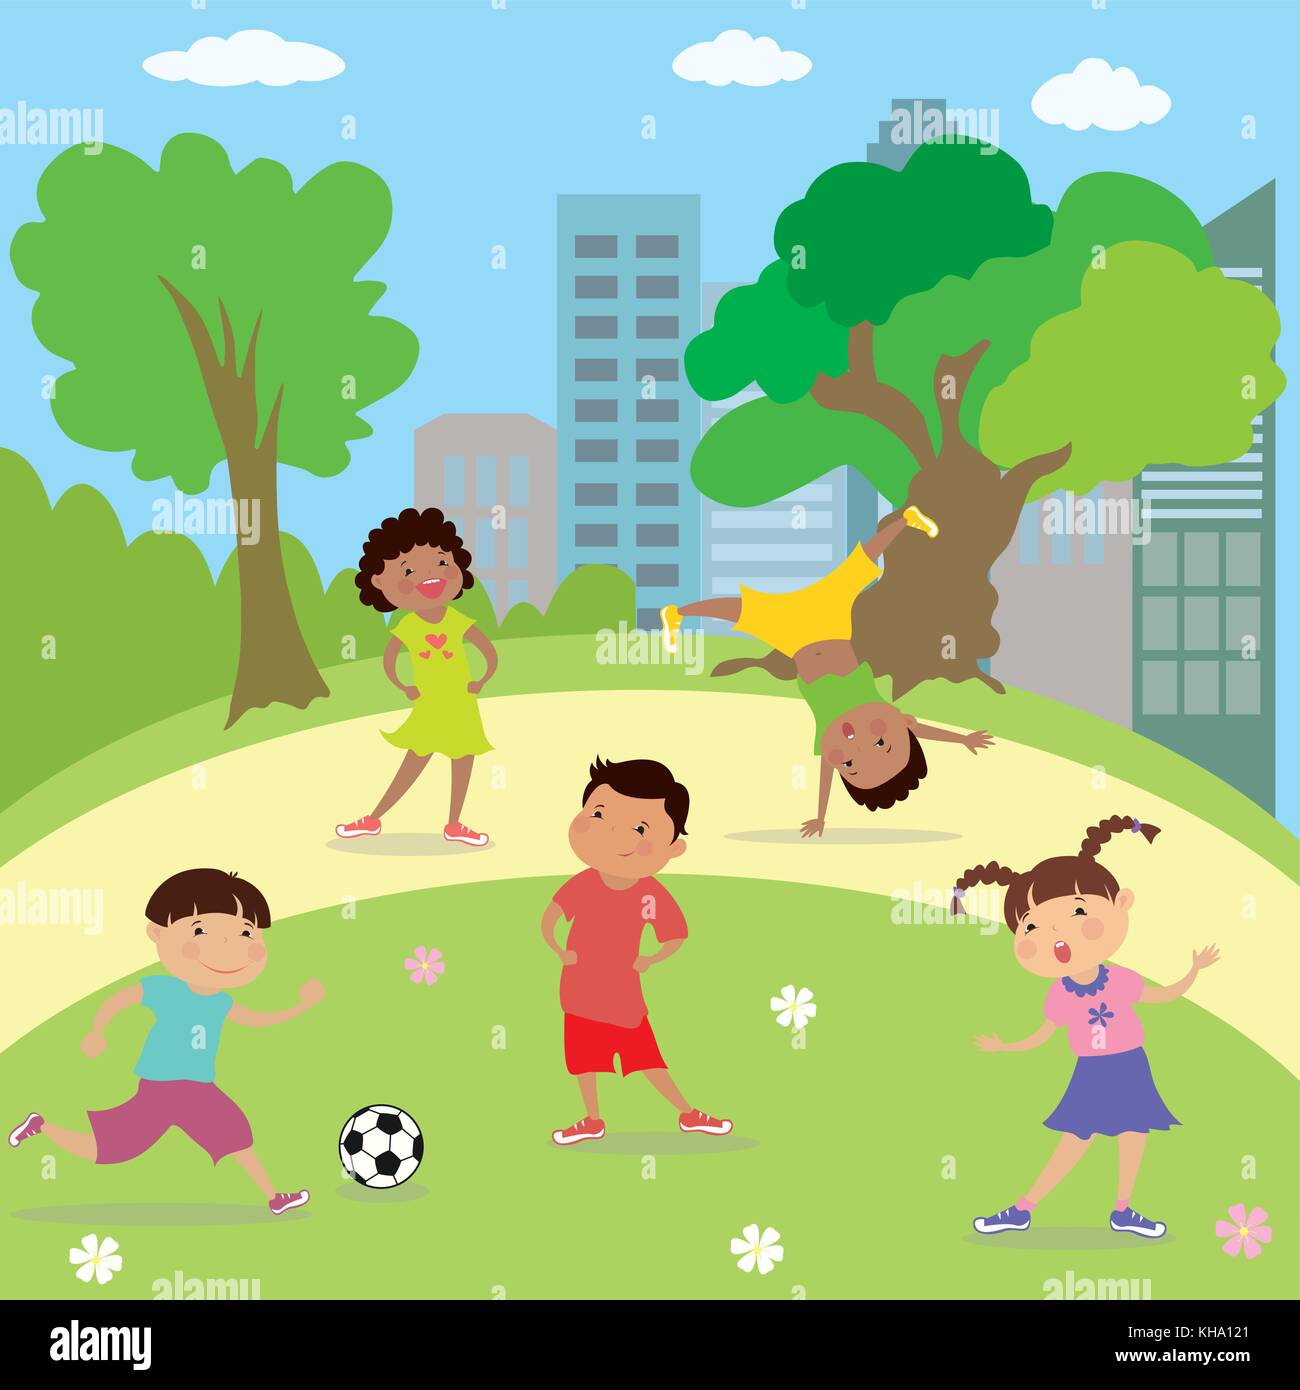 Children playing in park,boys and girls different races,cartoon vector illustration Stock Vector